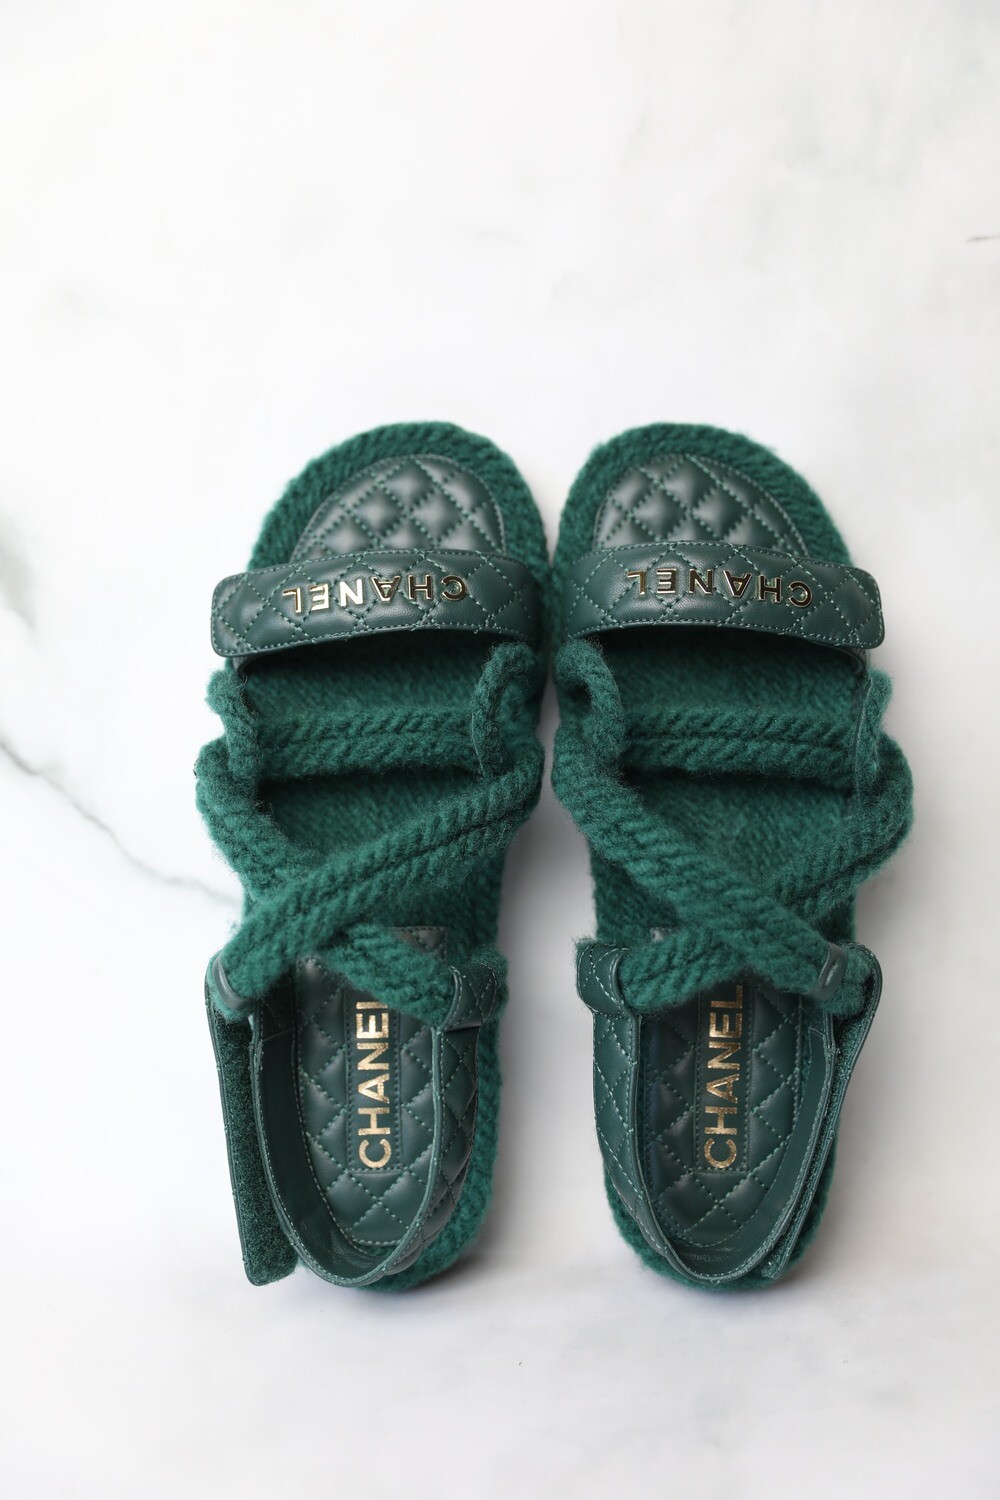 CHANEL, Shoes, Chanel Rope Sandals